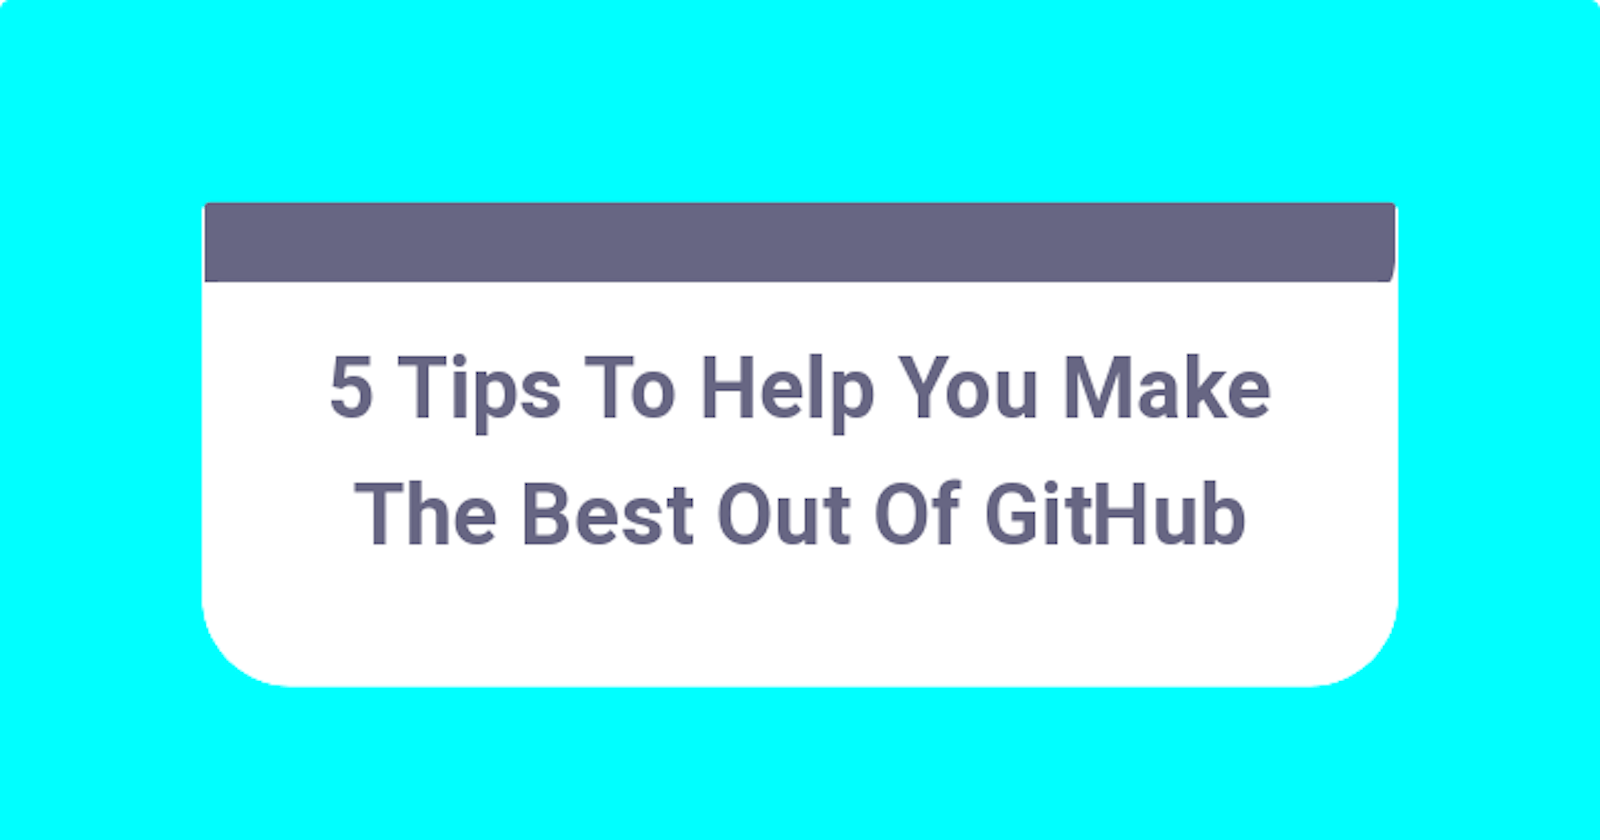 5 Tips To Help You Make The Best Out Of GitHub